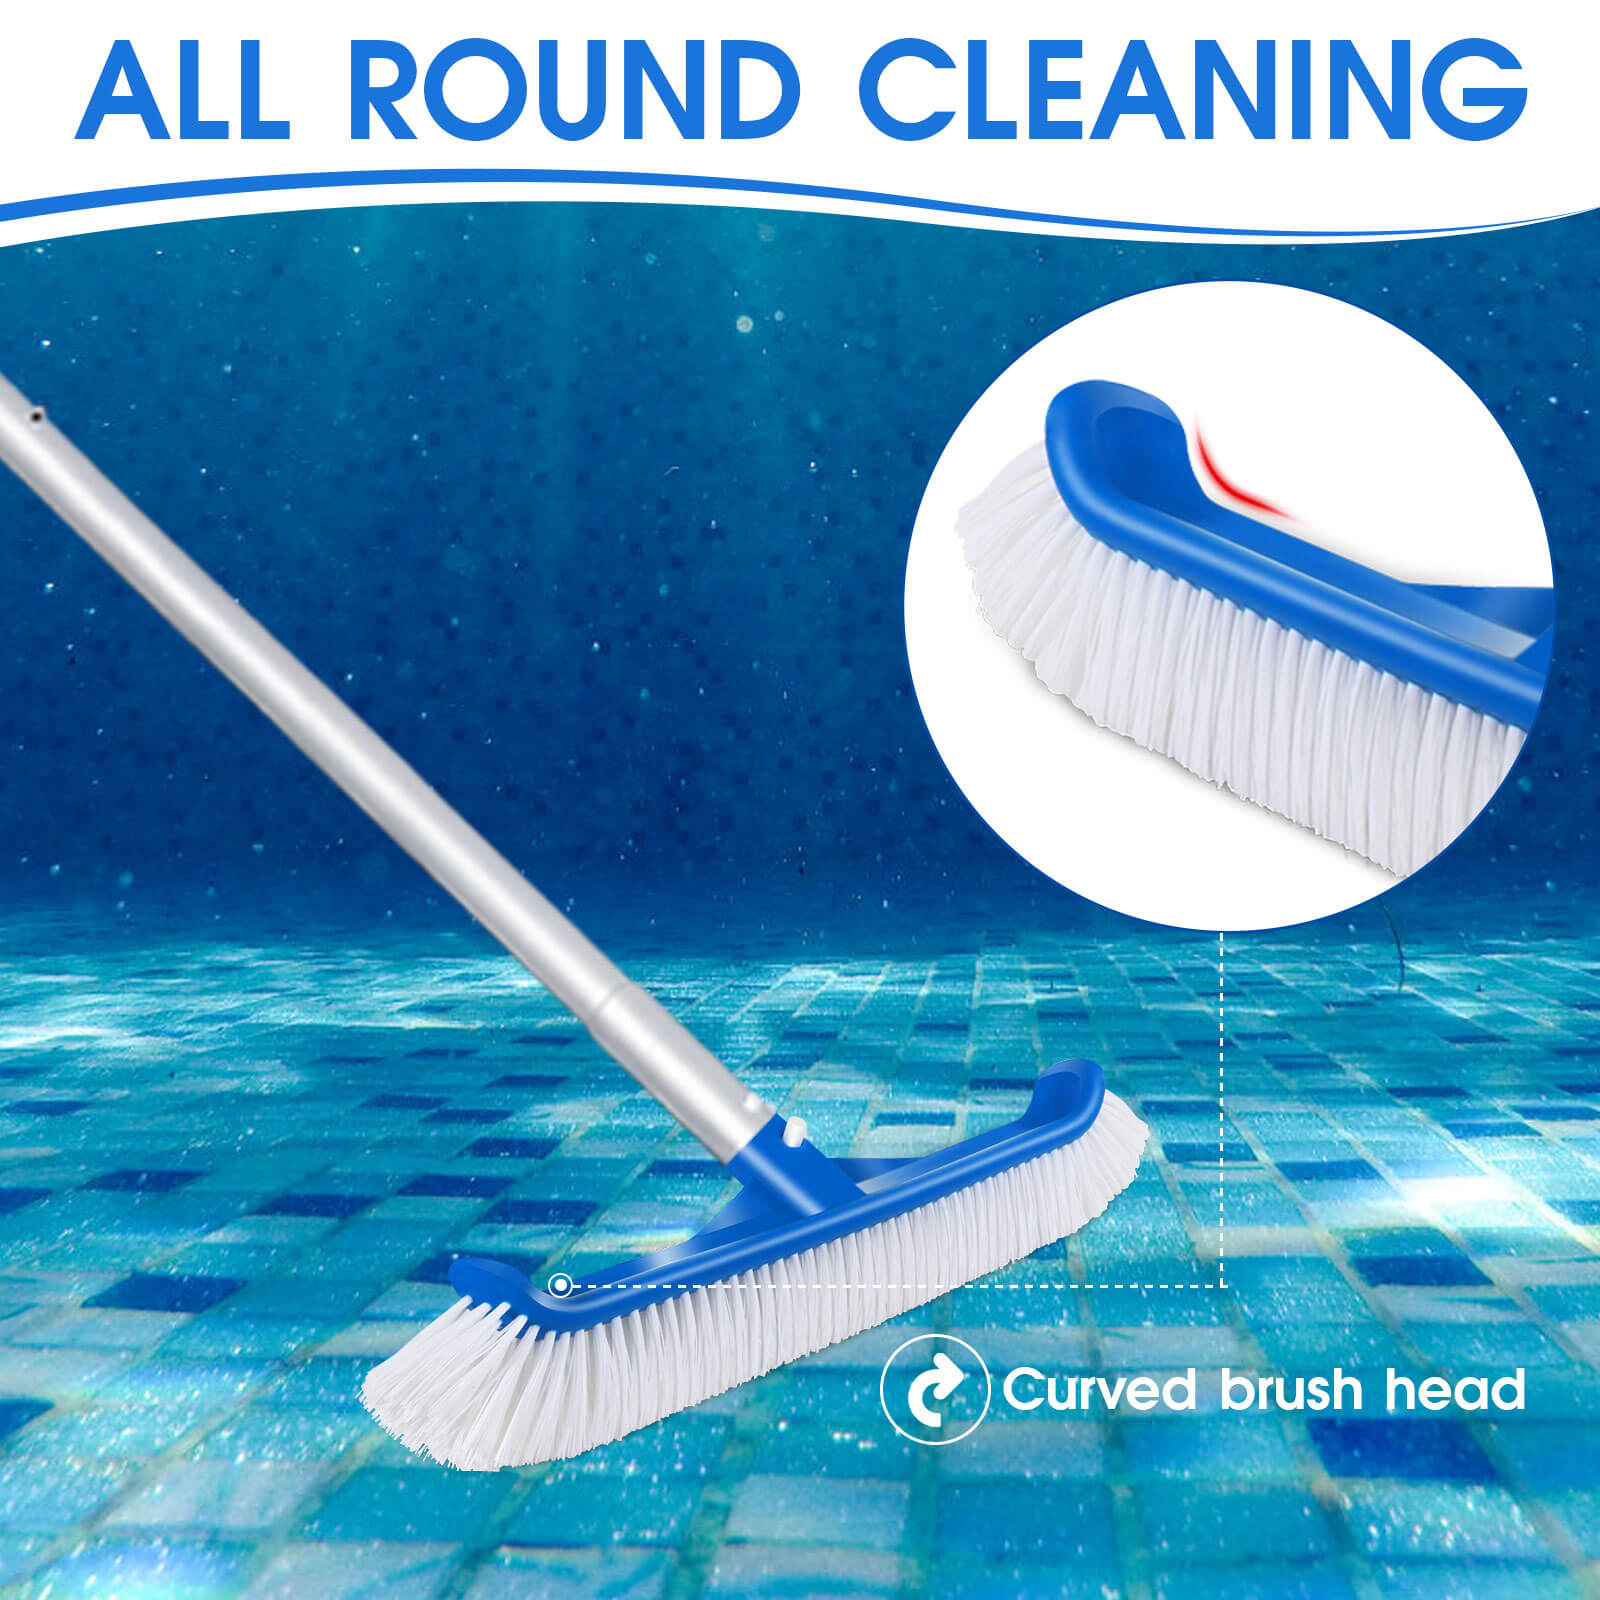 Masthome Pool Cleaning Kit (Pool Brush, Pool Skimmer Net, Floating Pool Thermometer)